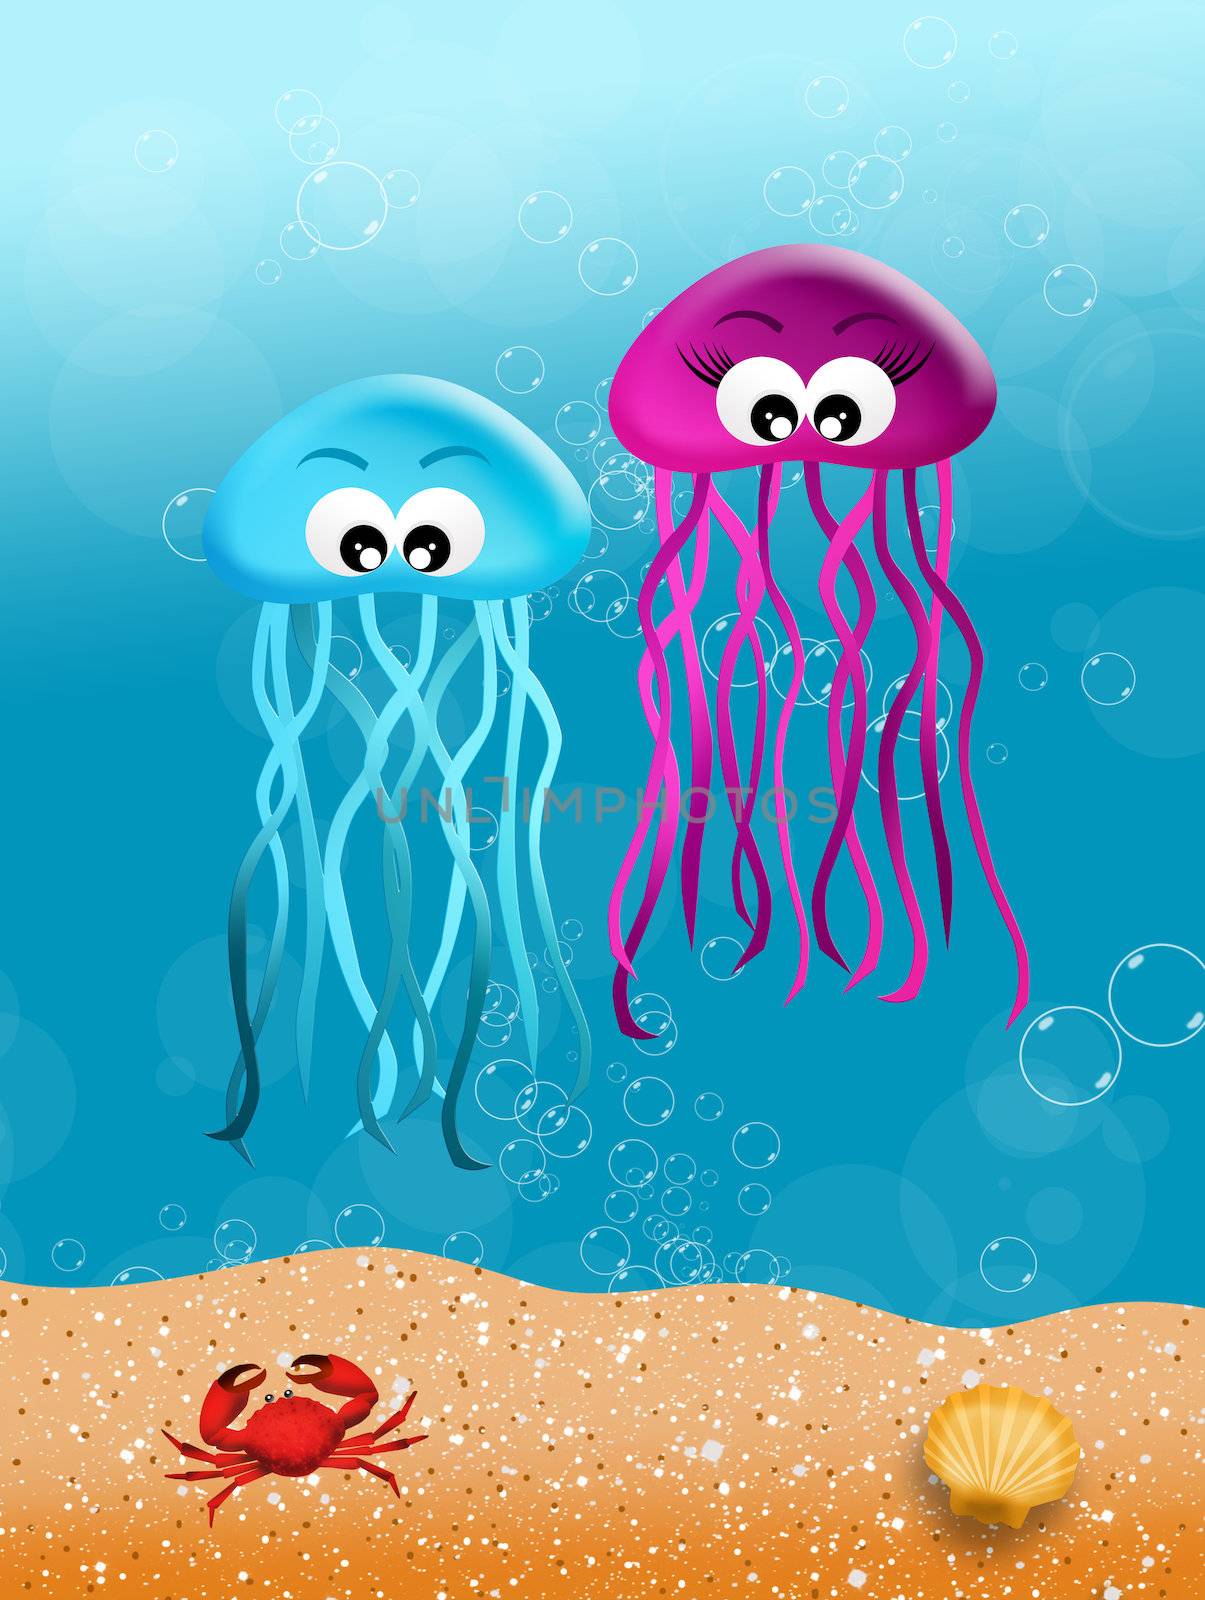 Jellyfishes in love